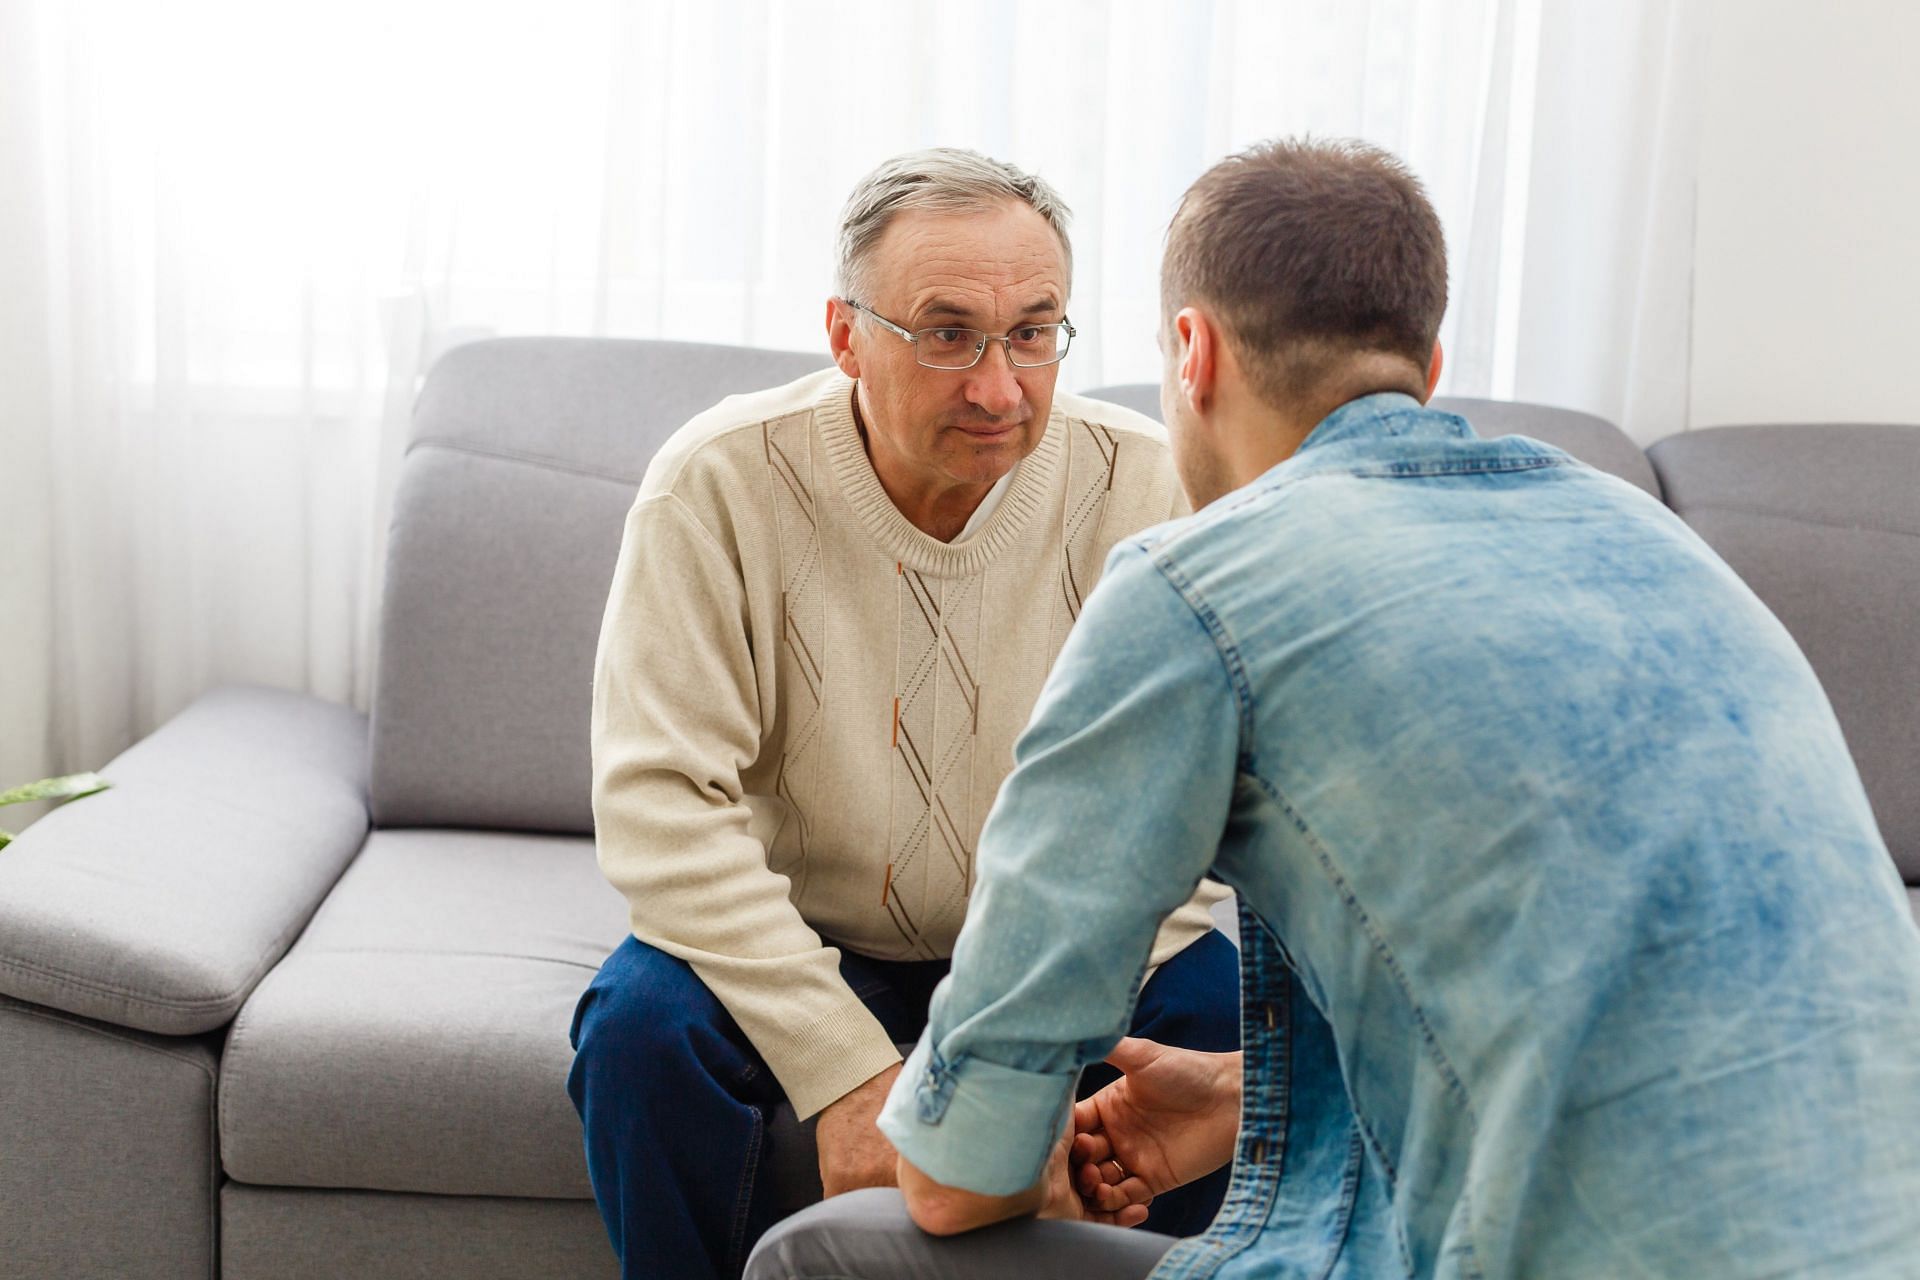 By identifying the early signs of Dementia in men, you can contribute in the healing process of men around you. (Image via Vecteezy/ Andrii Synenkyi)